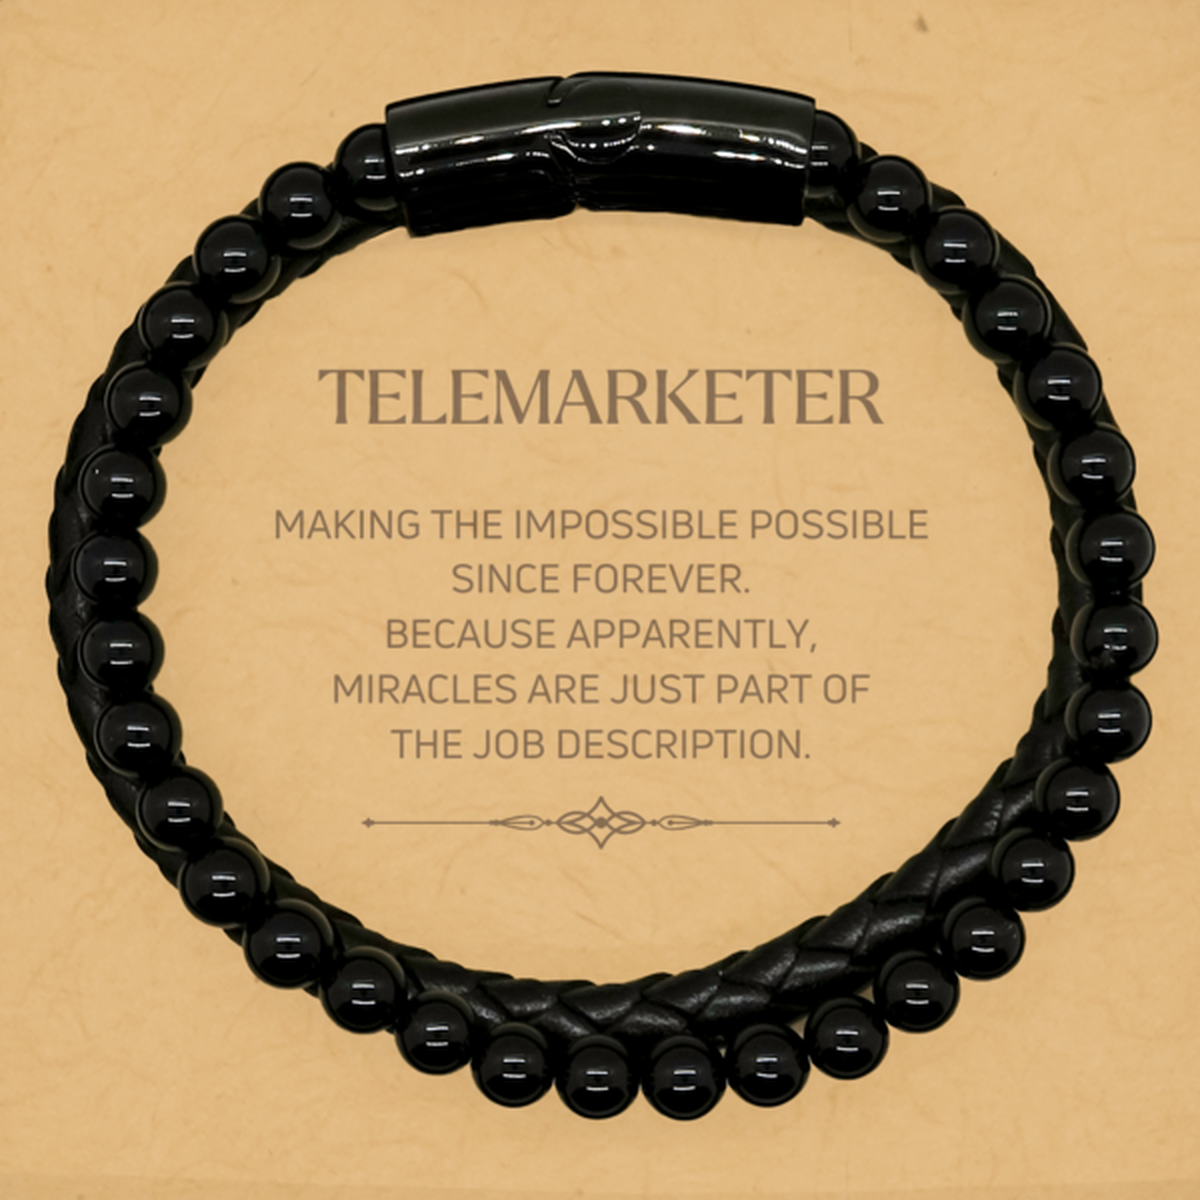 Funny Telemarketer Gifts, Miracles are just part of the job description, Inspirational Birthday Stone Leather Bracelets For Telemarketer, Men, Women, Coworkers, Friends, Boss